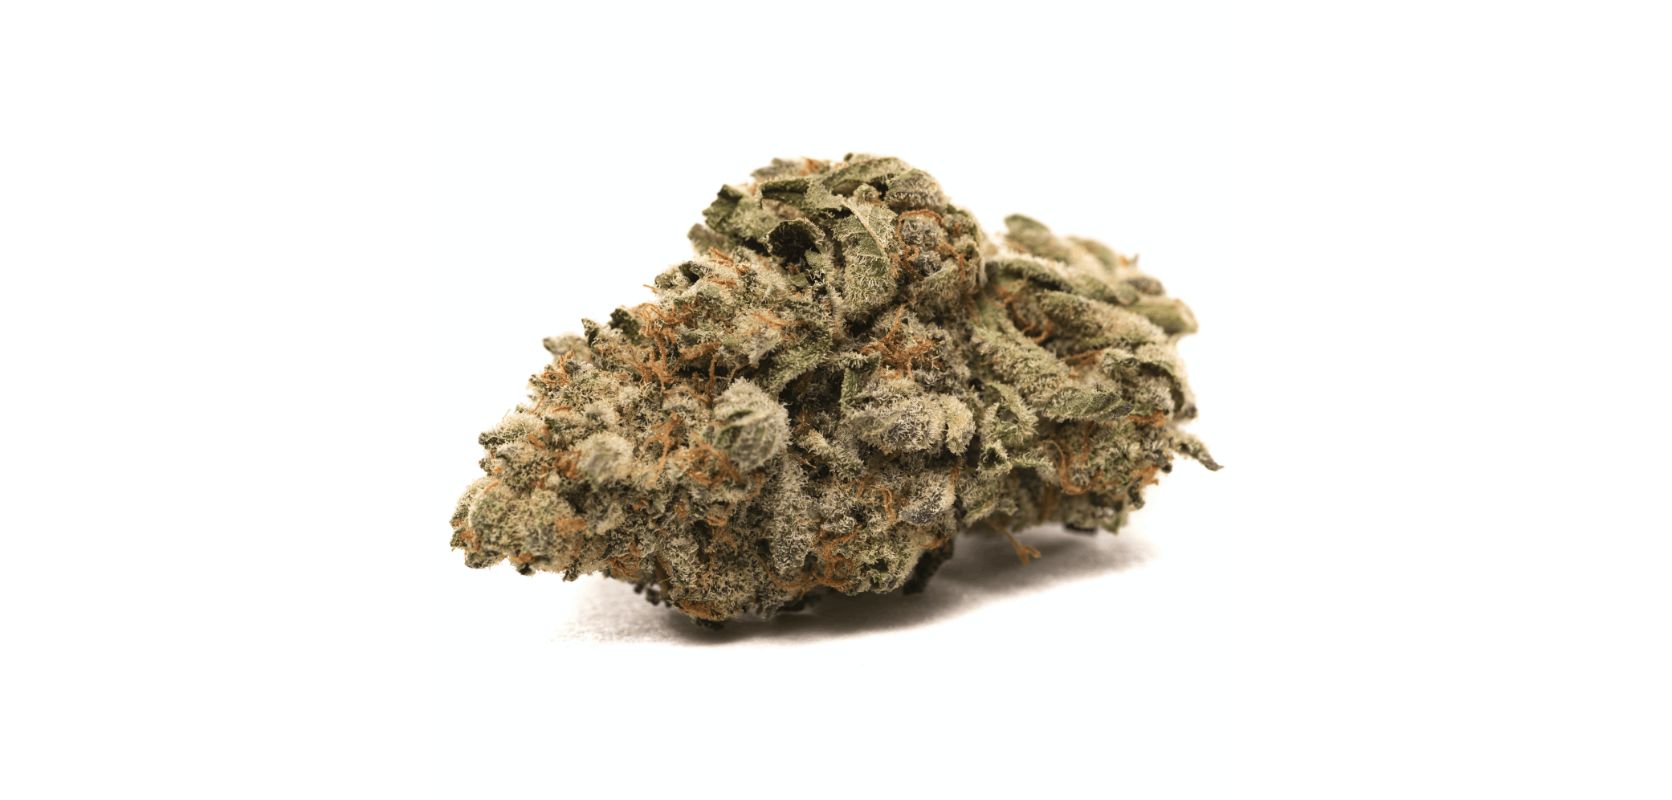 The Grease Monkey strain is a world-famous Indica hybrid with a lineage that includes two powerhouse strains, Cookies & Cream and Gorilla Glue #4. 